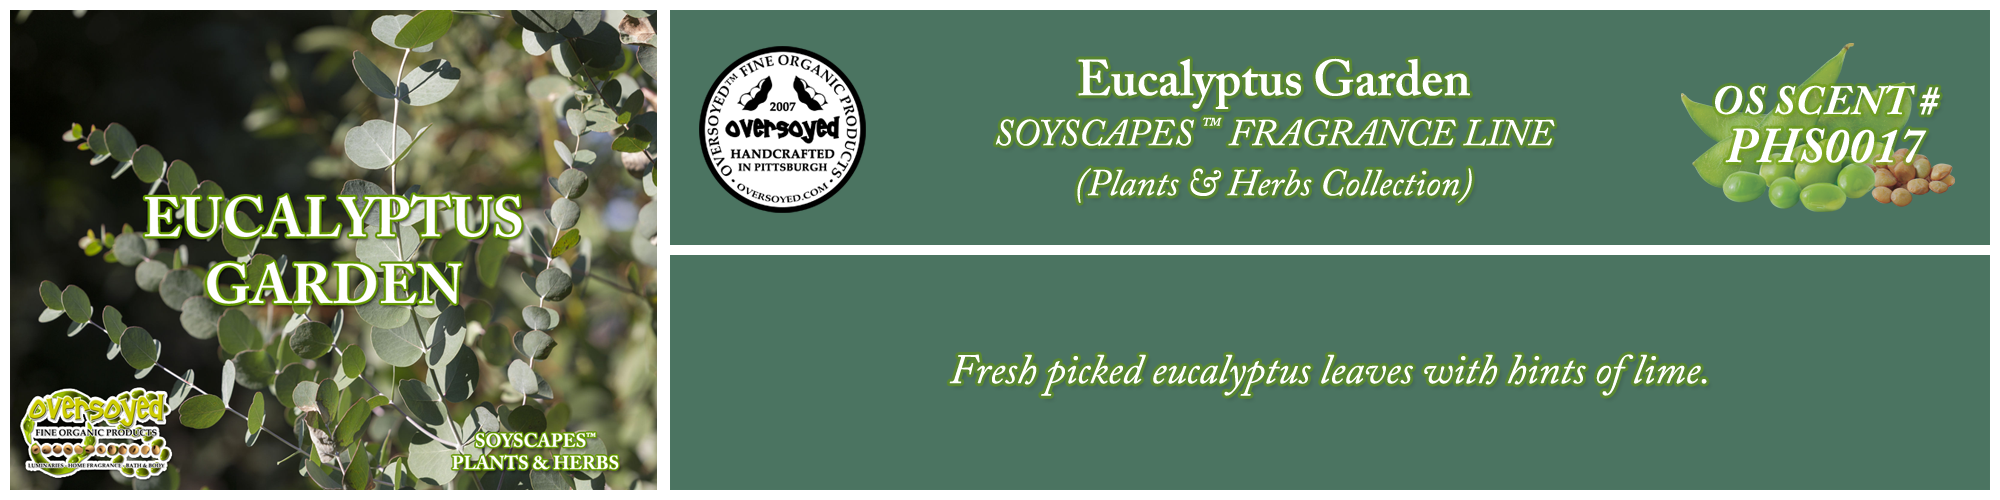 Eucalyptus Garden Handcrafted Products Collection